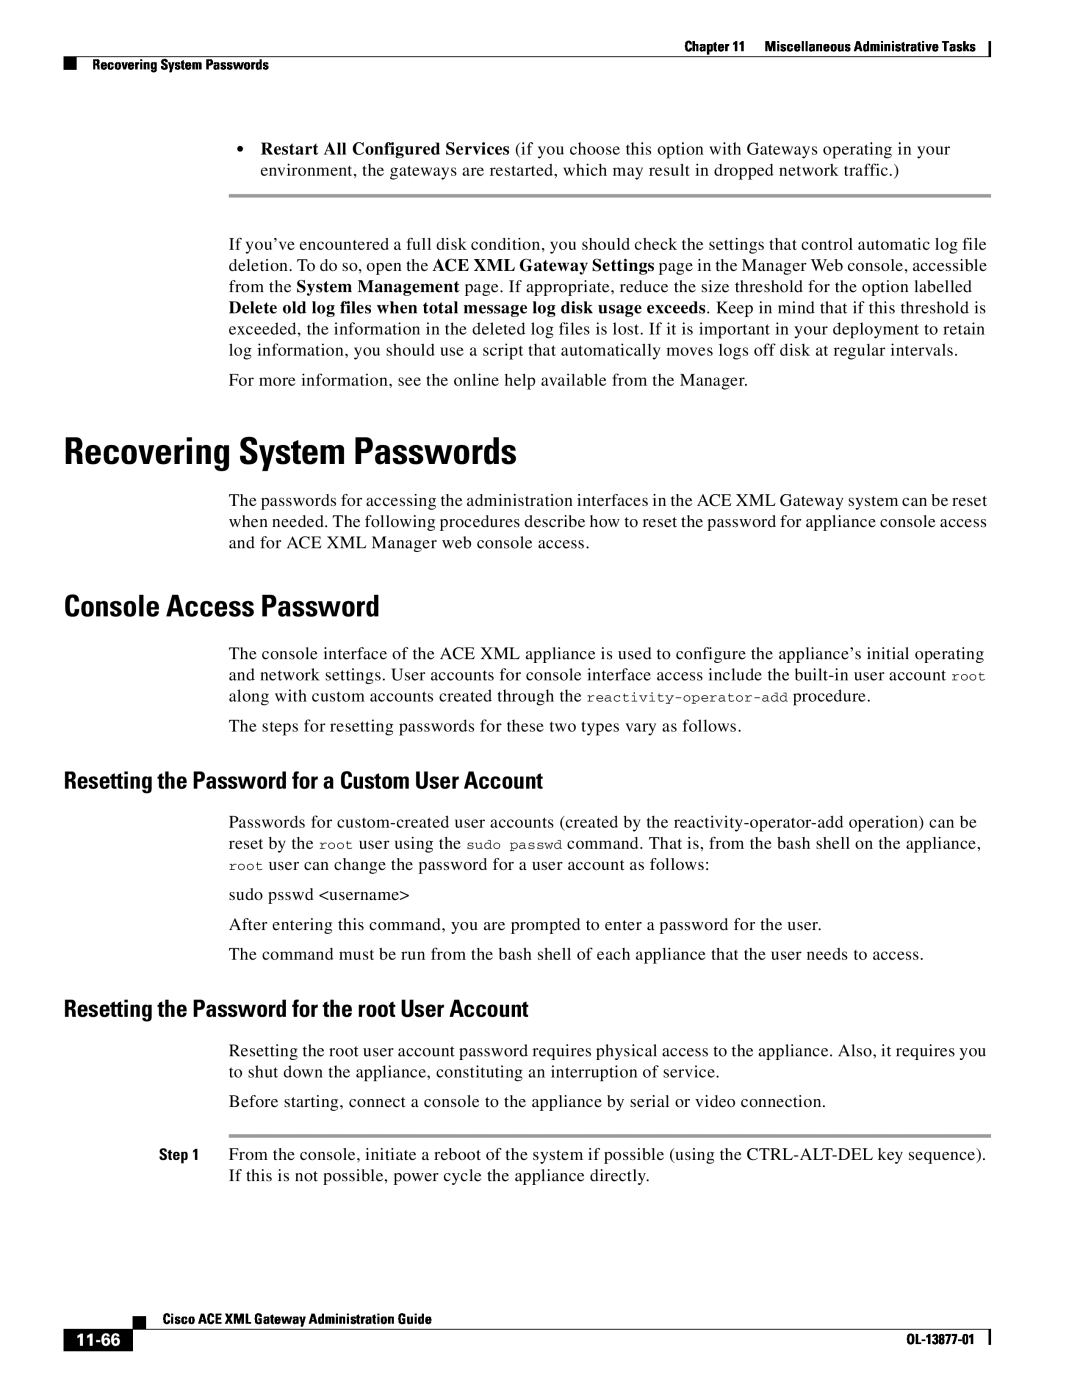 Cisco Systems OL-13877-01 manual Recovering System Passwords, Console Access Password, 11-66 